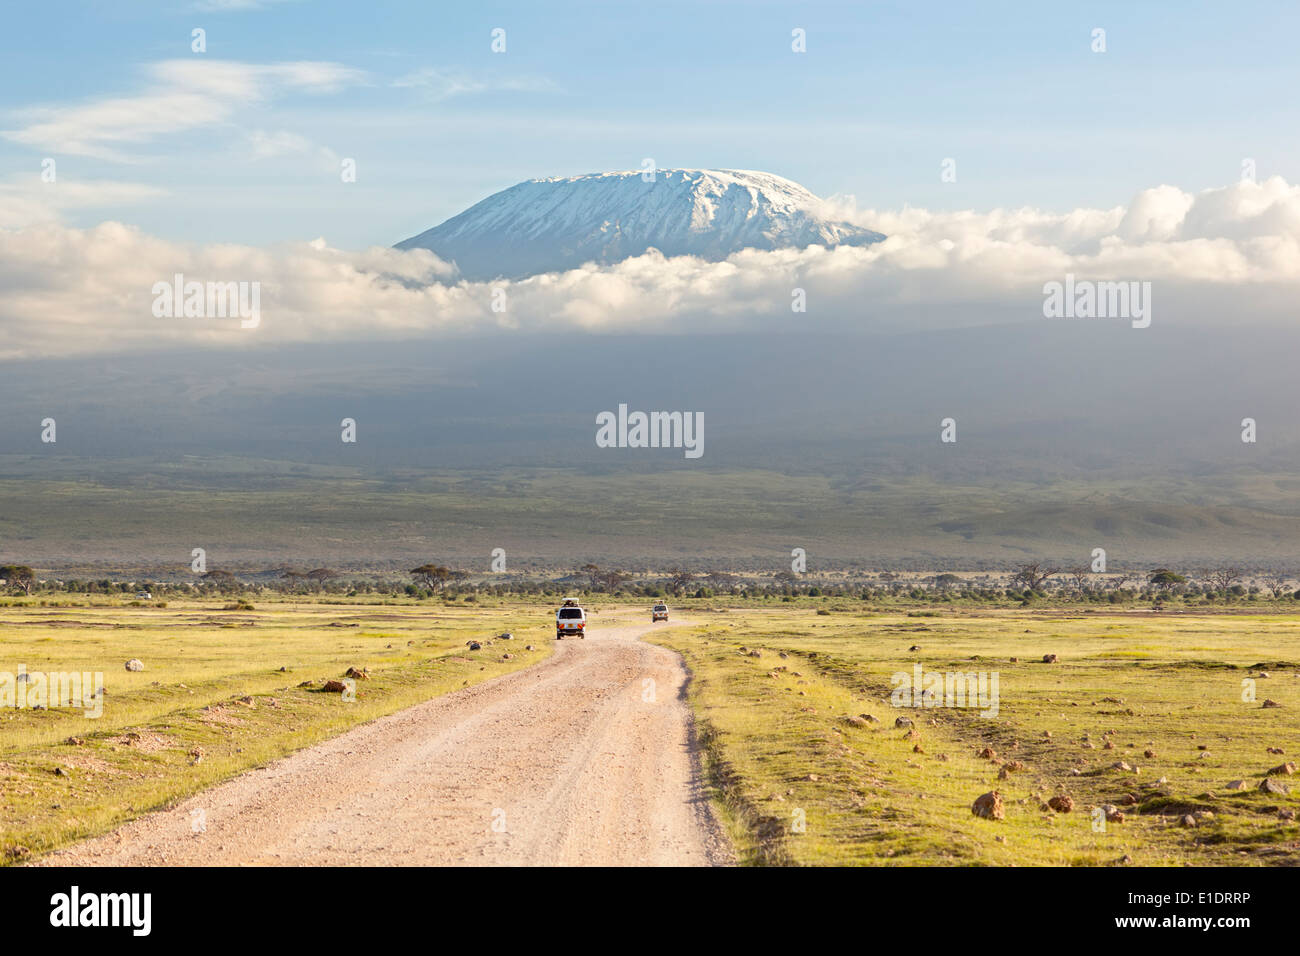 Kilimanjaro with snow cap seen from Amboseli National Park in Kenya with a road in the foreground. Stock Photo